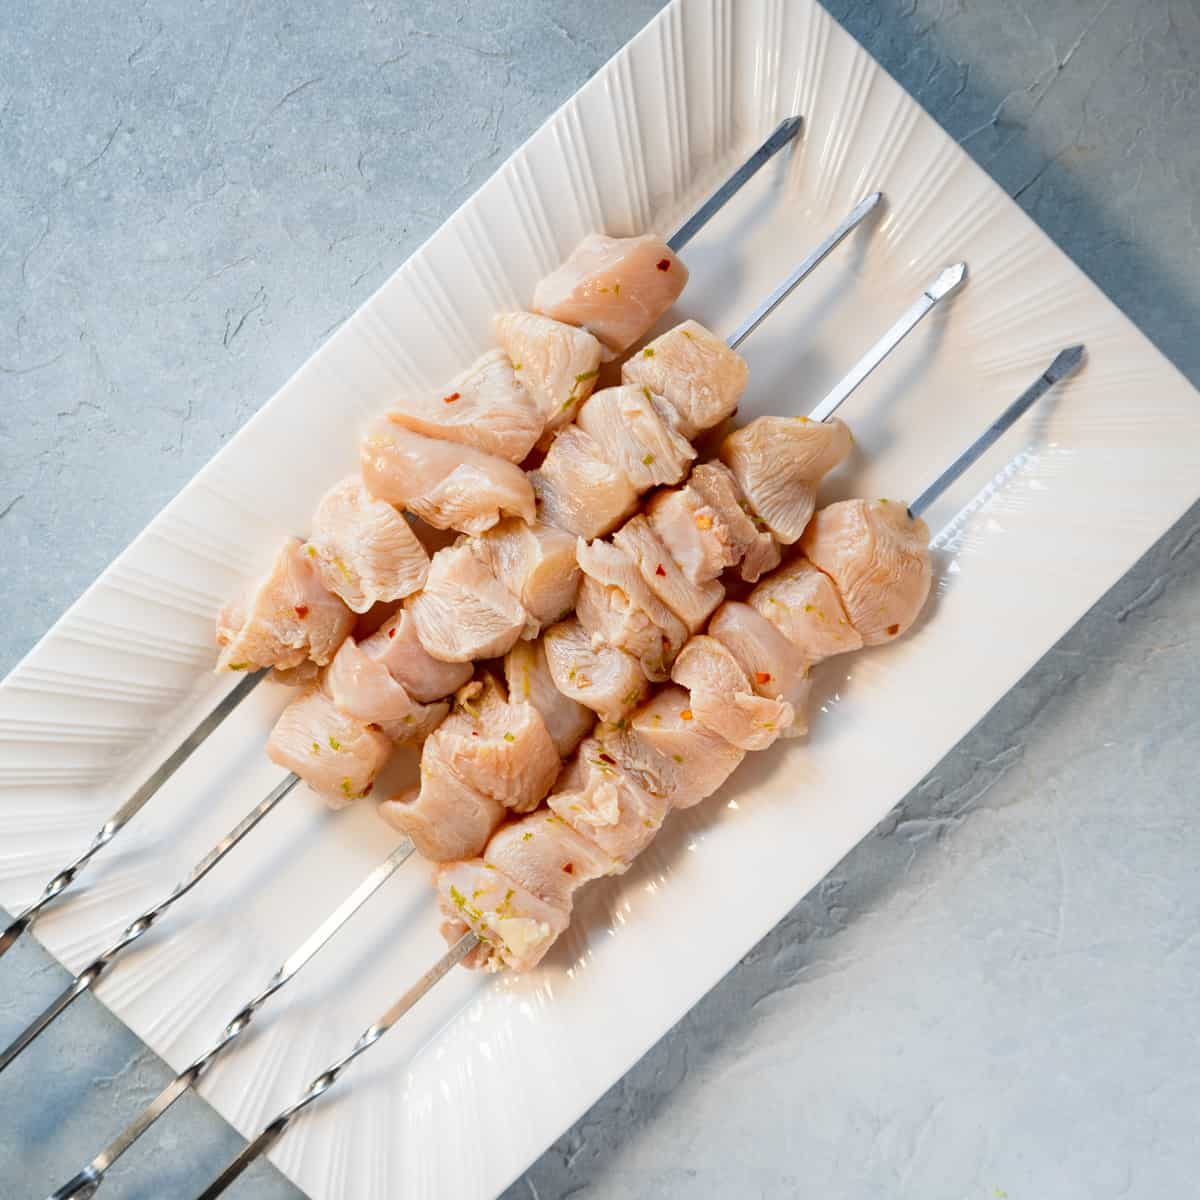 4 chicken kabobs on a white plate before grilling.